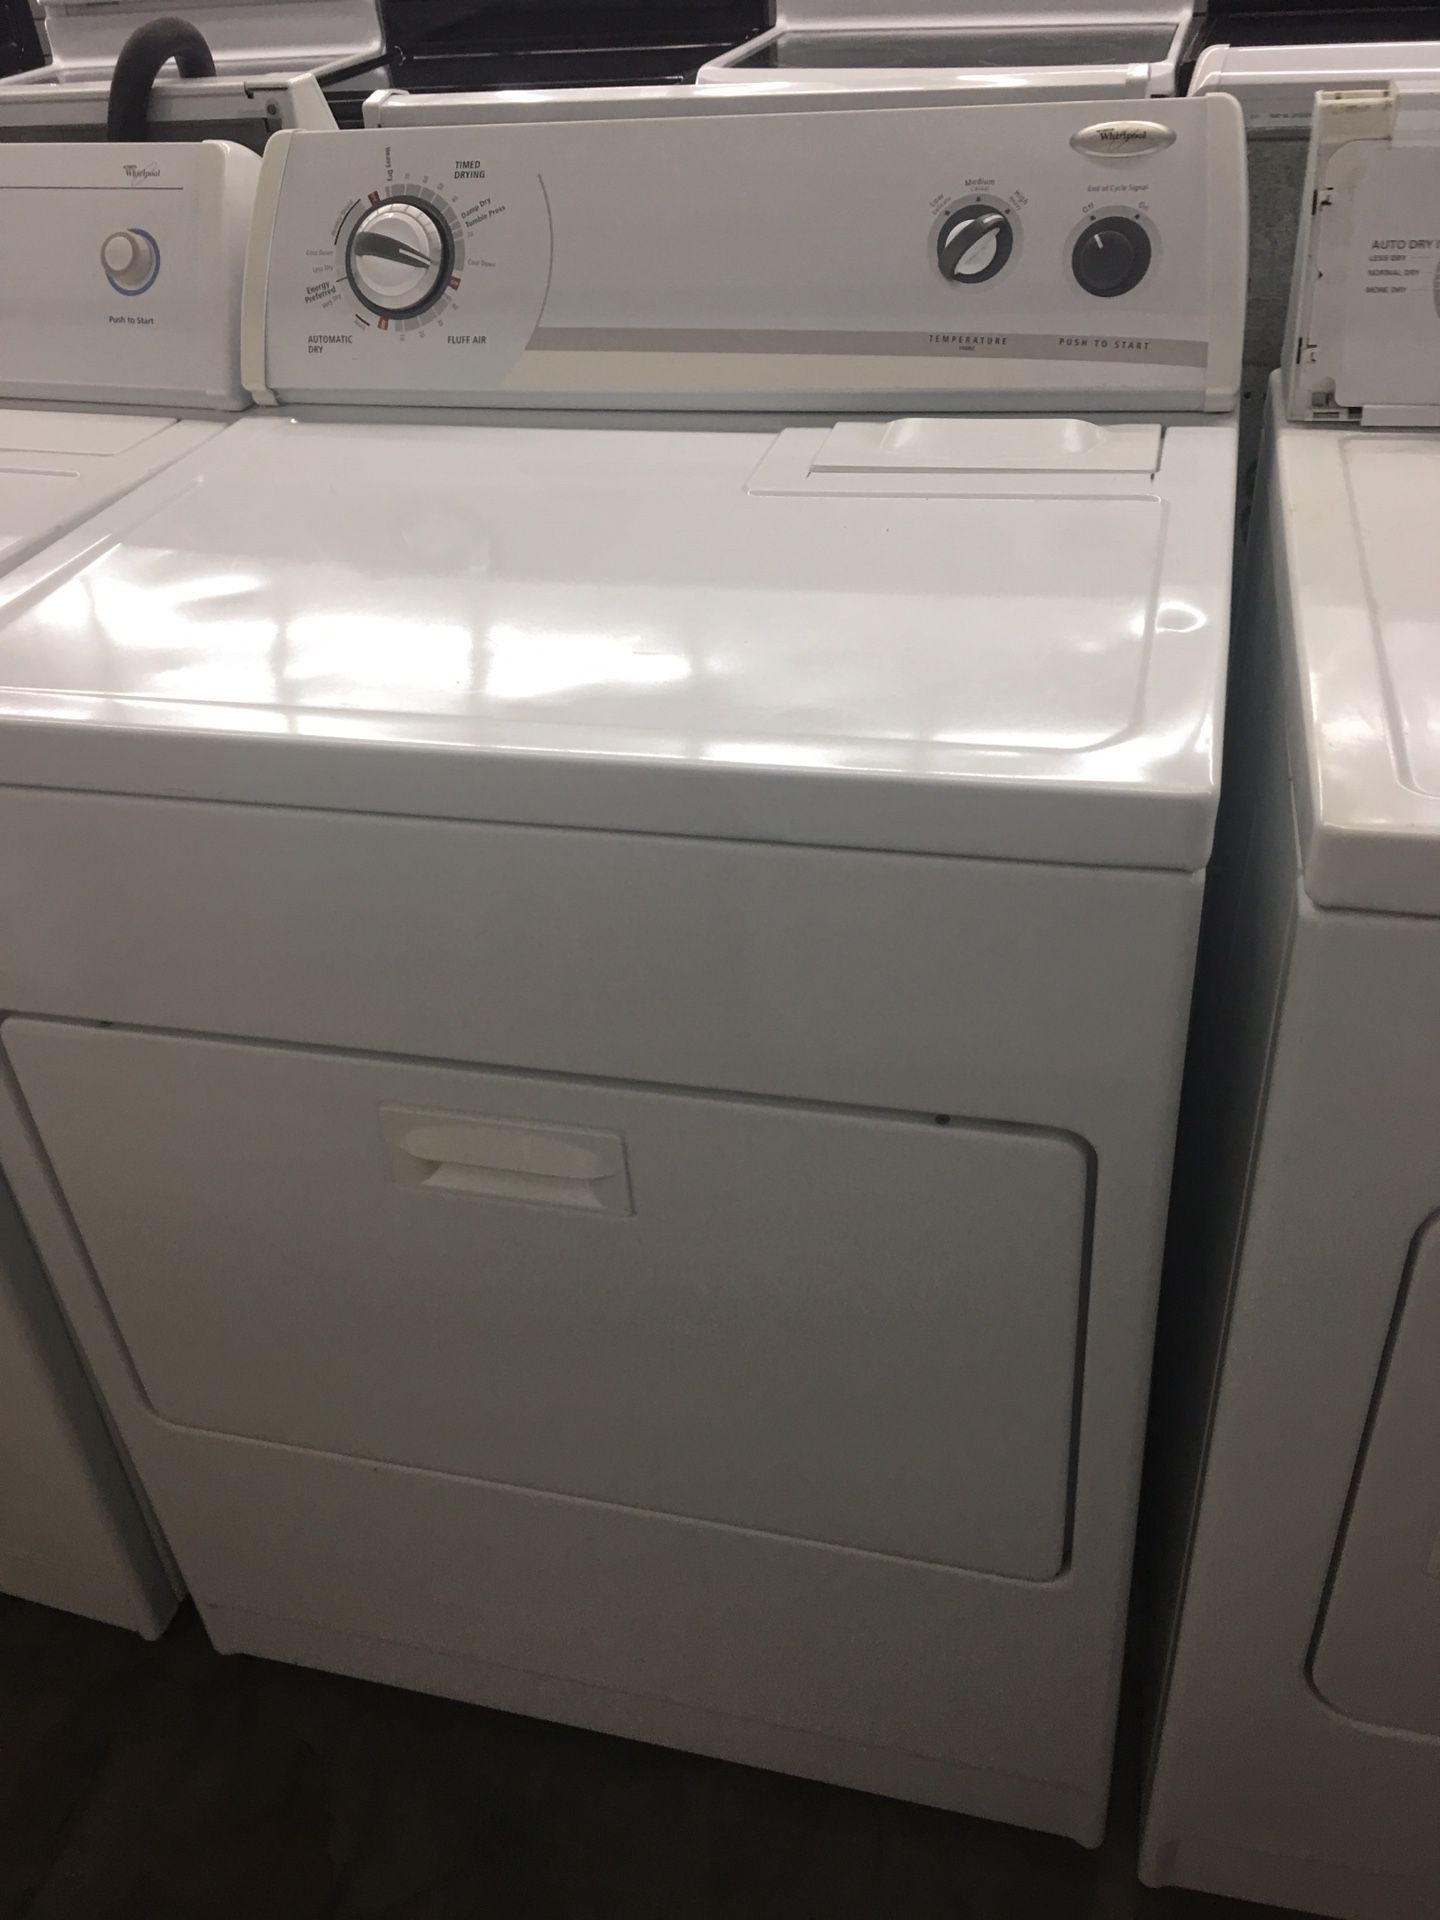 Whirlpool dryer with 5 month warranty